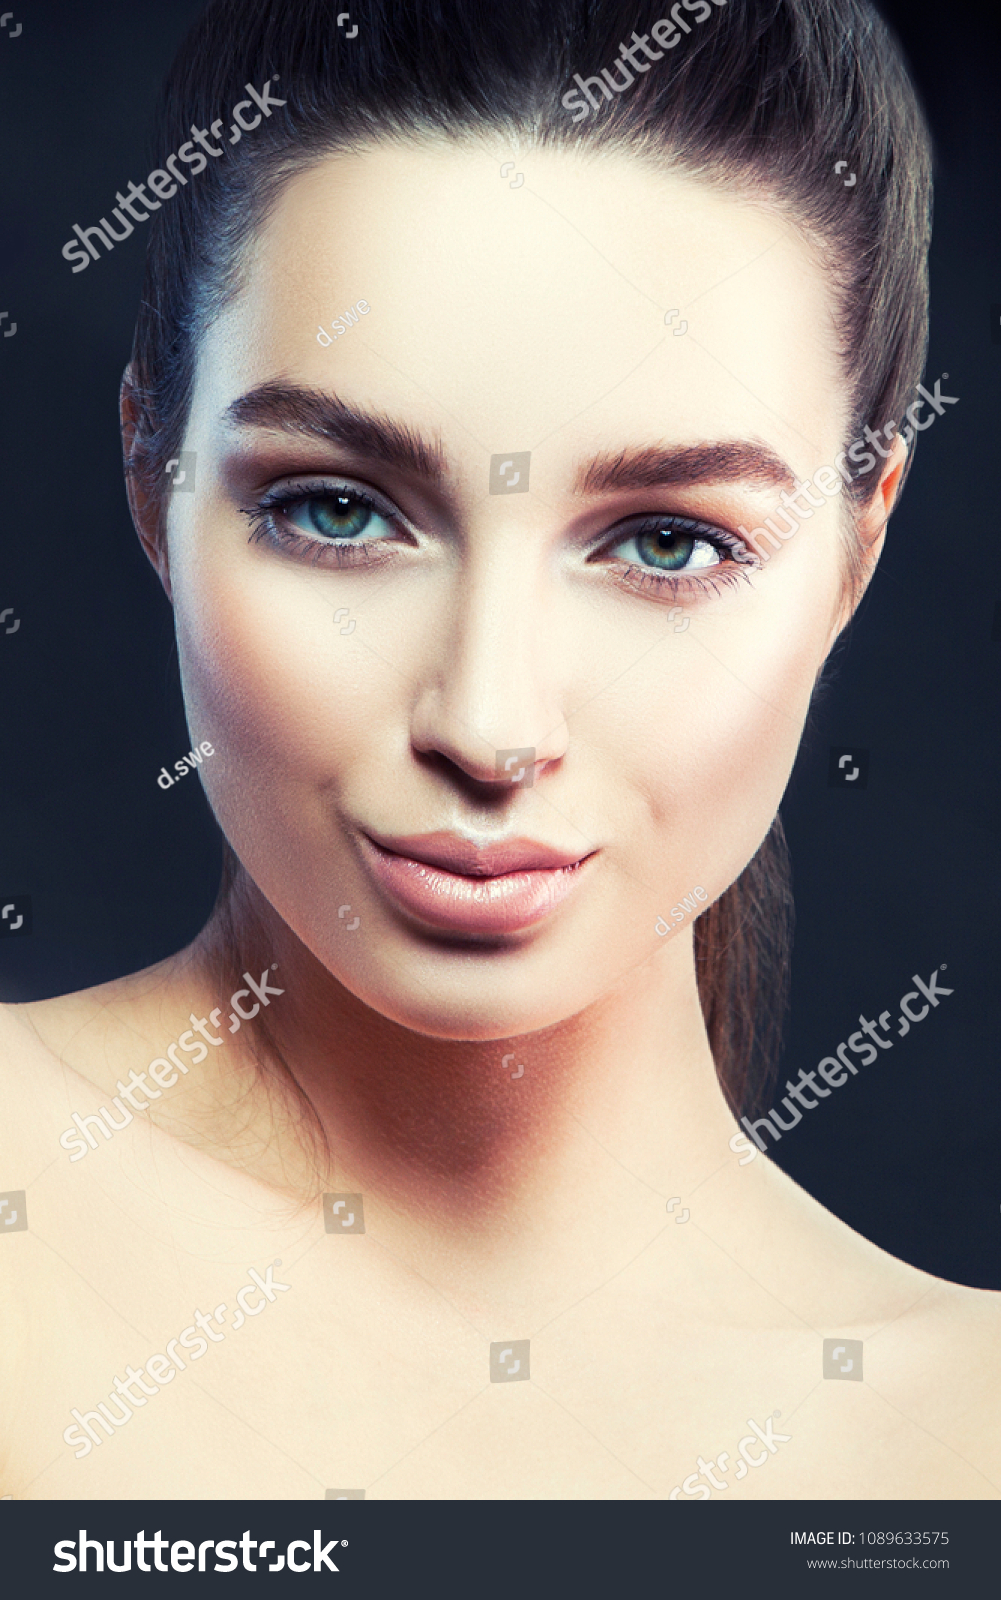 Natural Makeup For Blue Eyes Beauty Girl Face Blue Eyes Natural Stock Photo Edit Now 1089633575